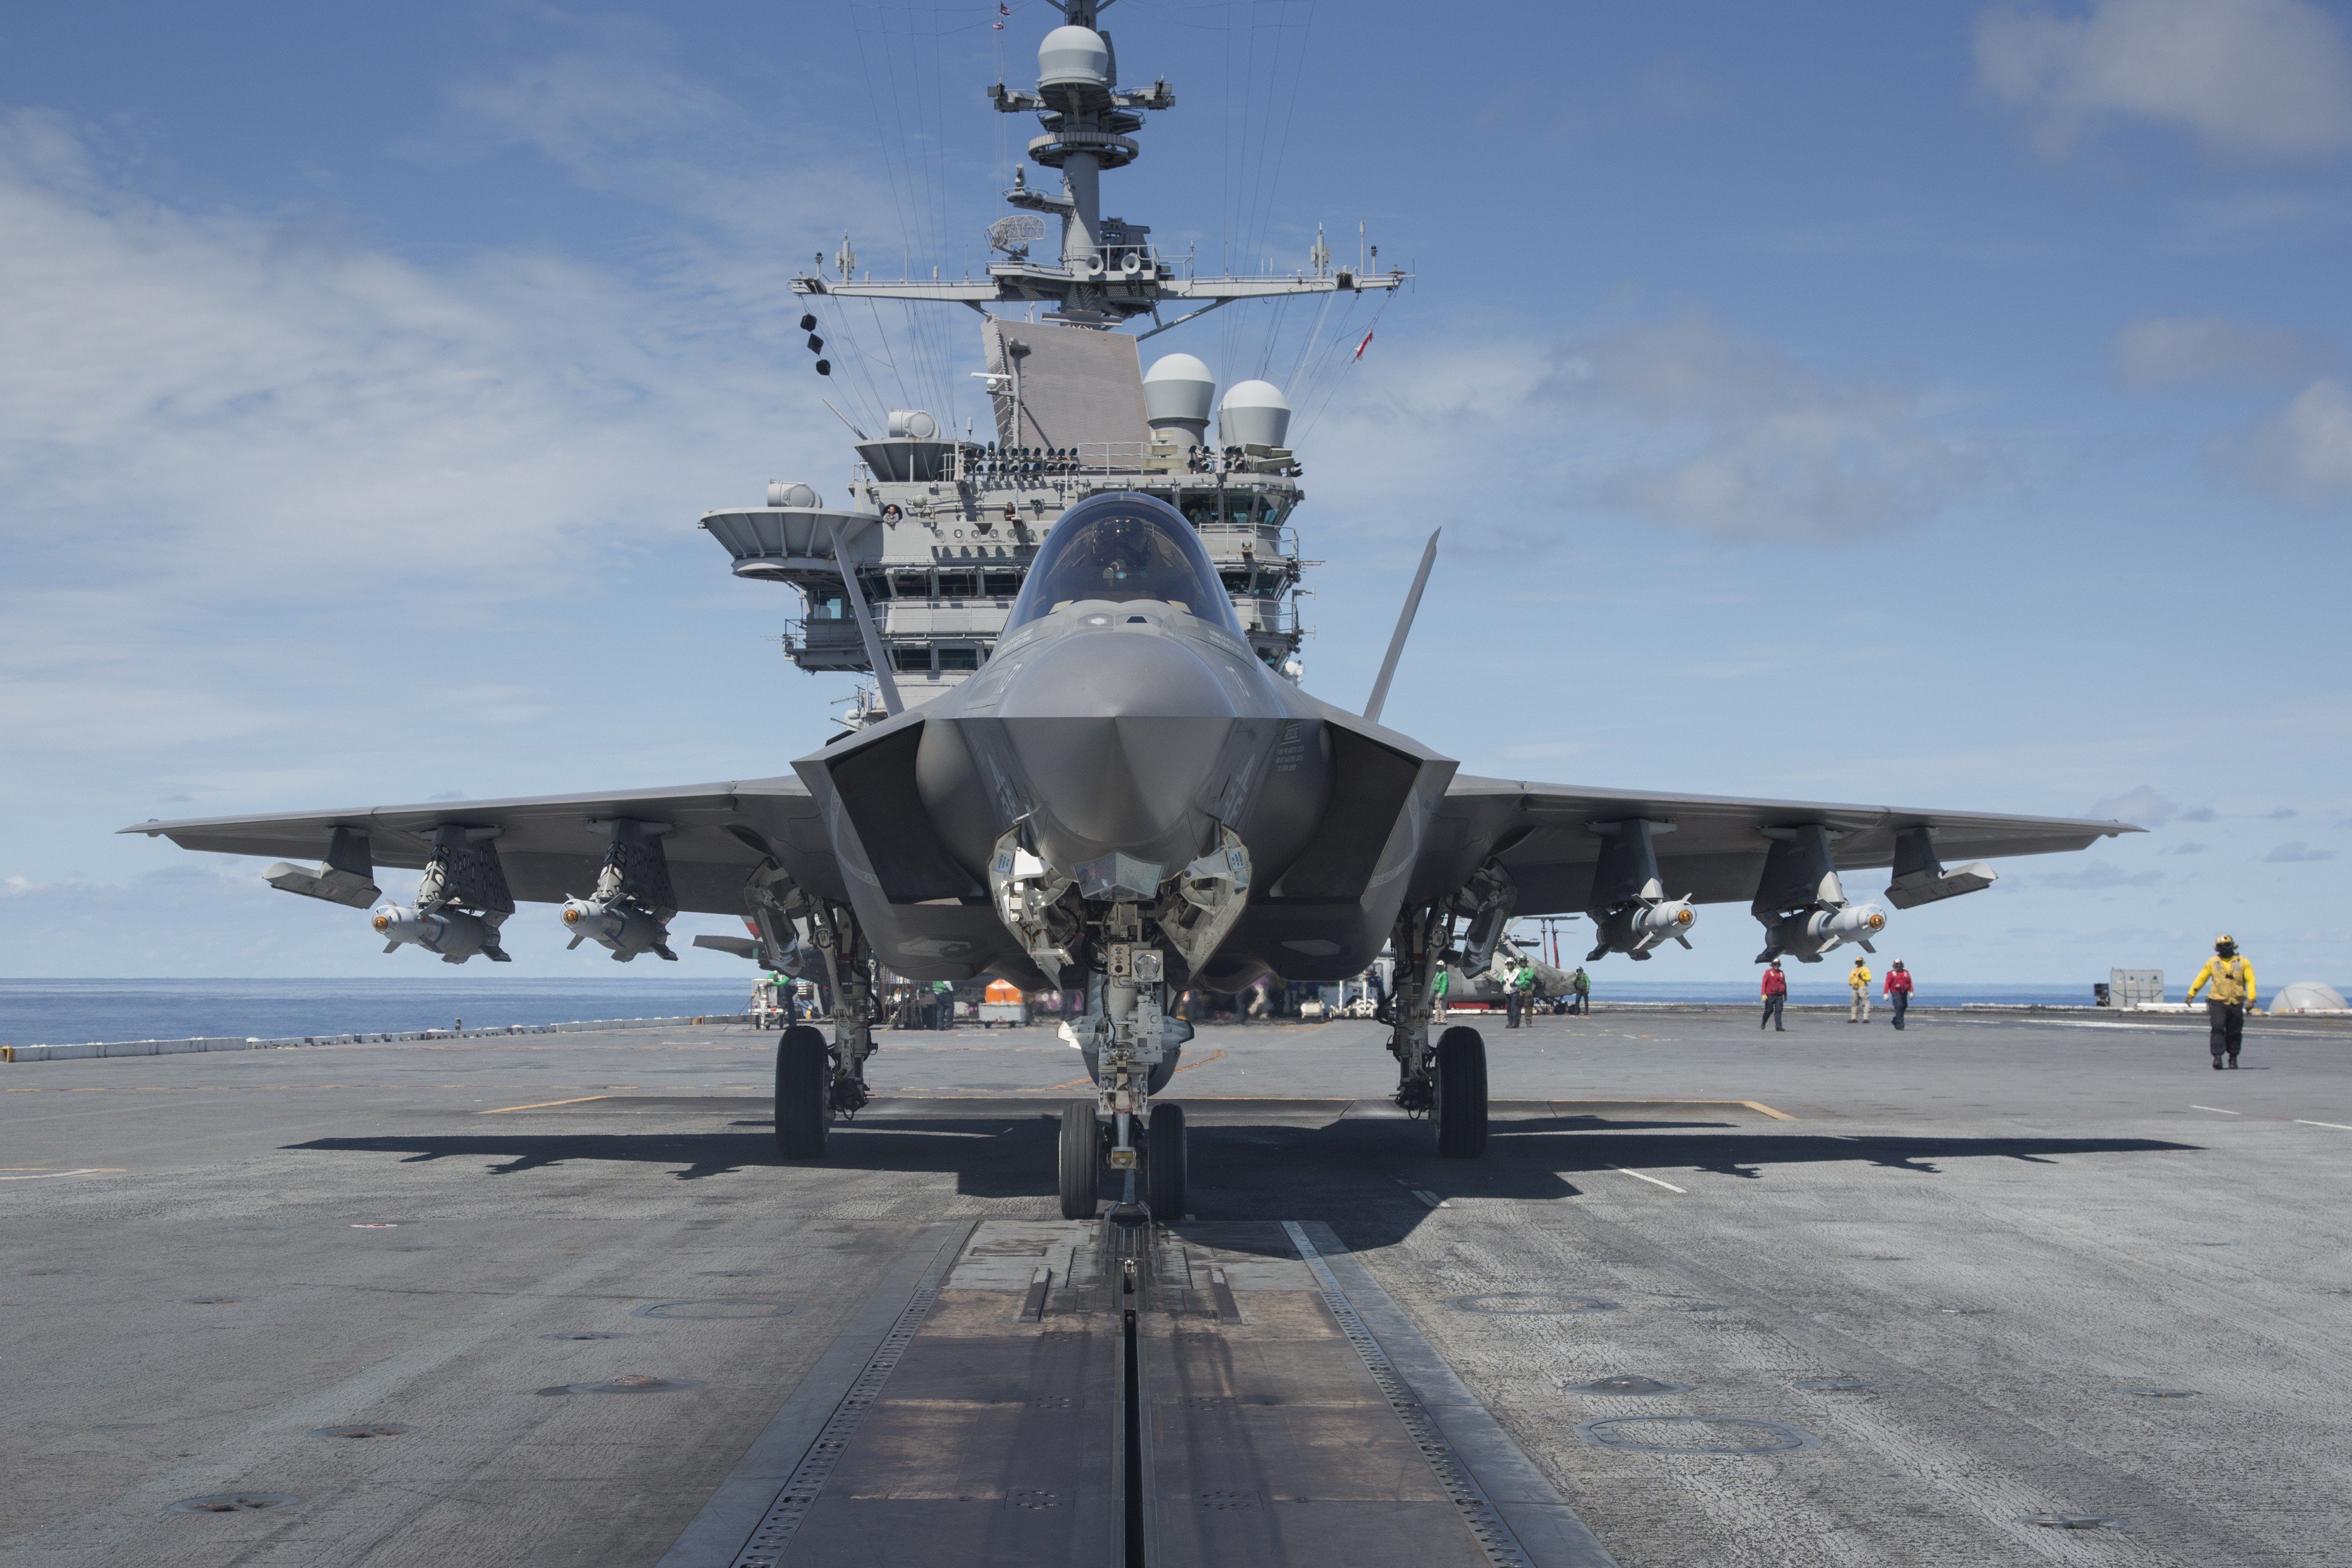 F 35 Lightning II, Military aircraft, Aircraft carrier, Military, Airplane Wallpaper